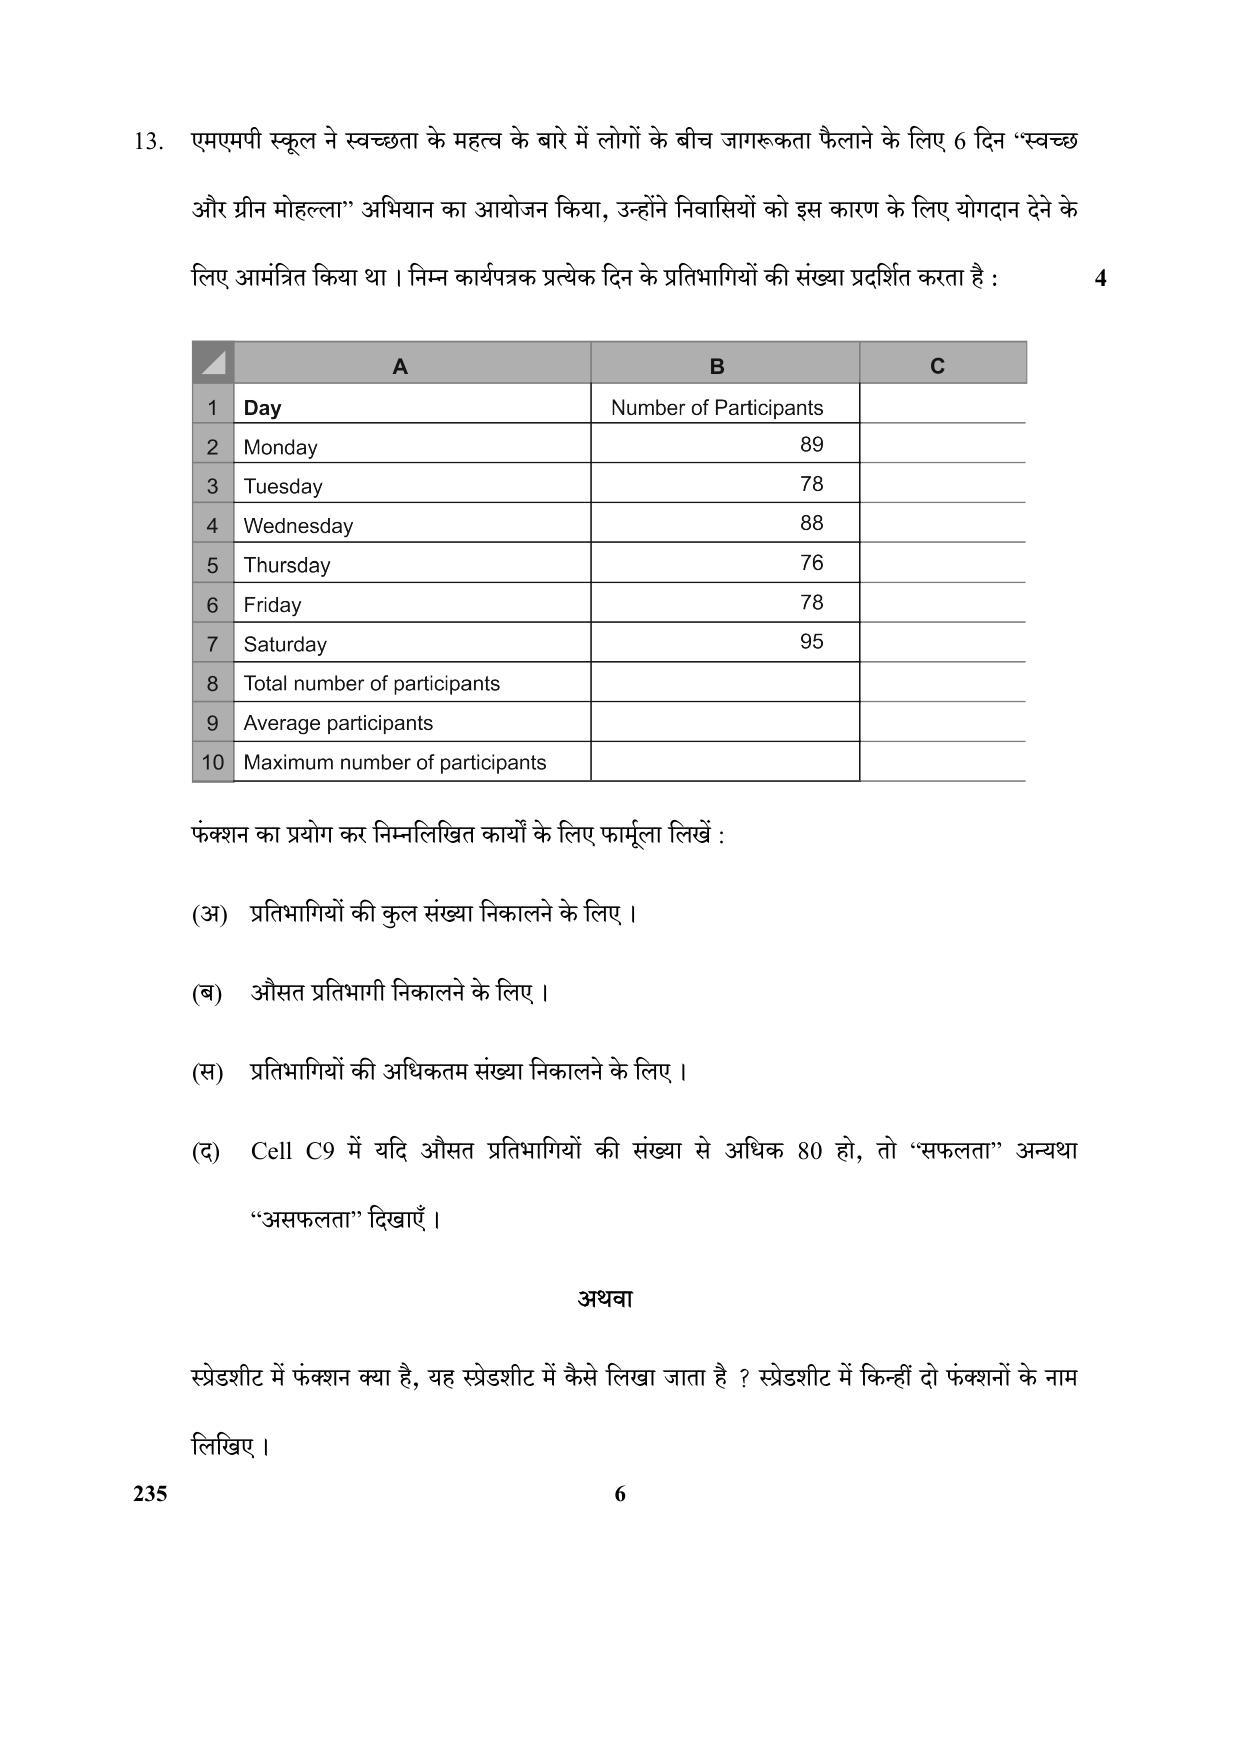 CBSE Class 10 235 Elements of Bookkeeping & Accountancy (Commerce) 2018 Question Paper - Page 6